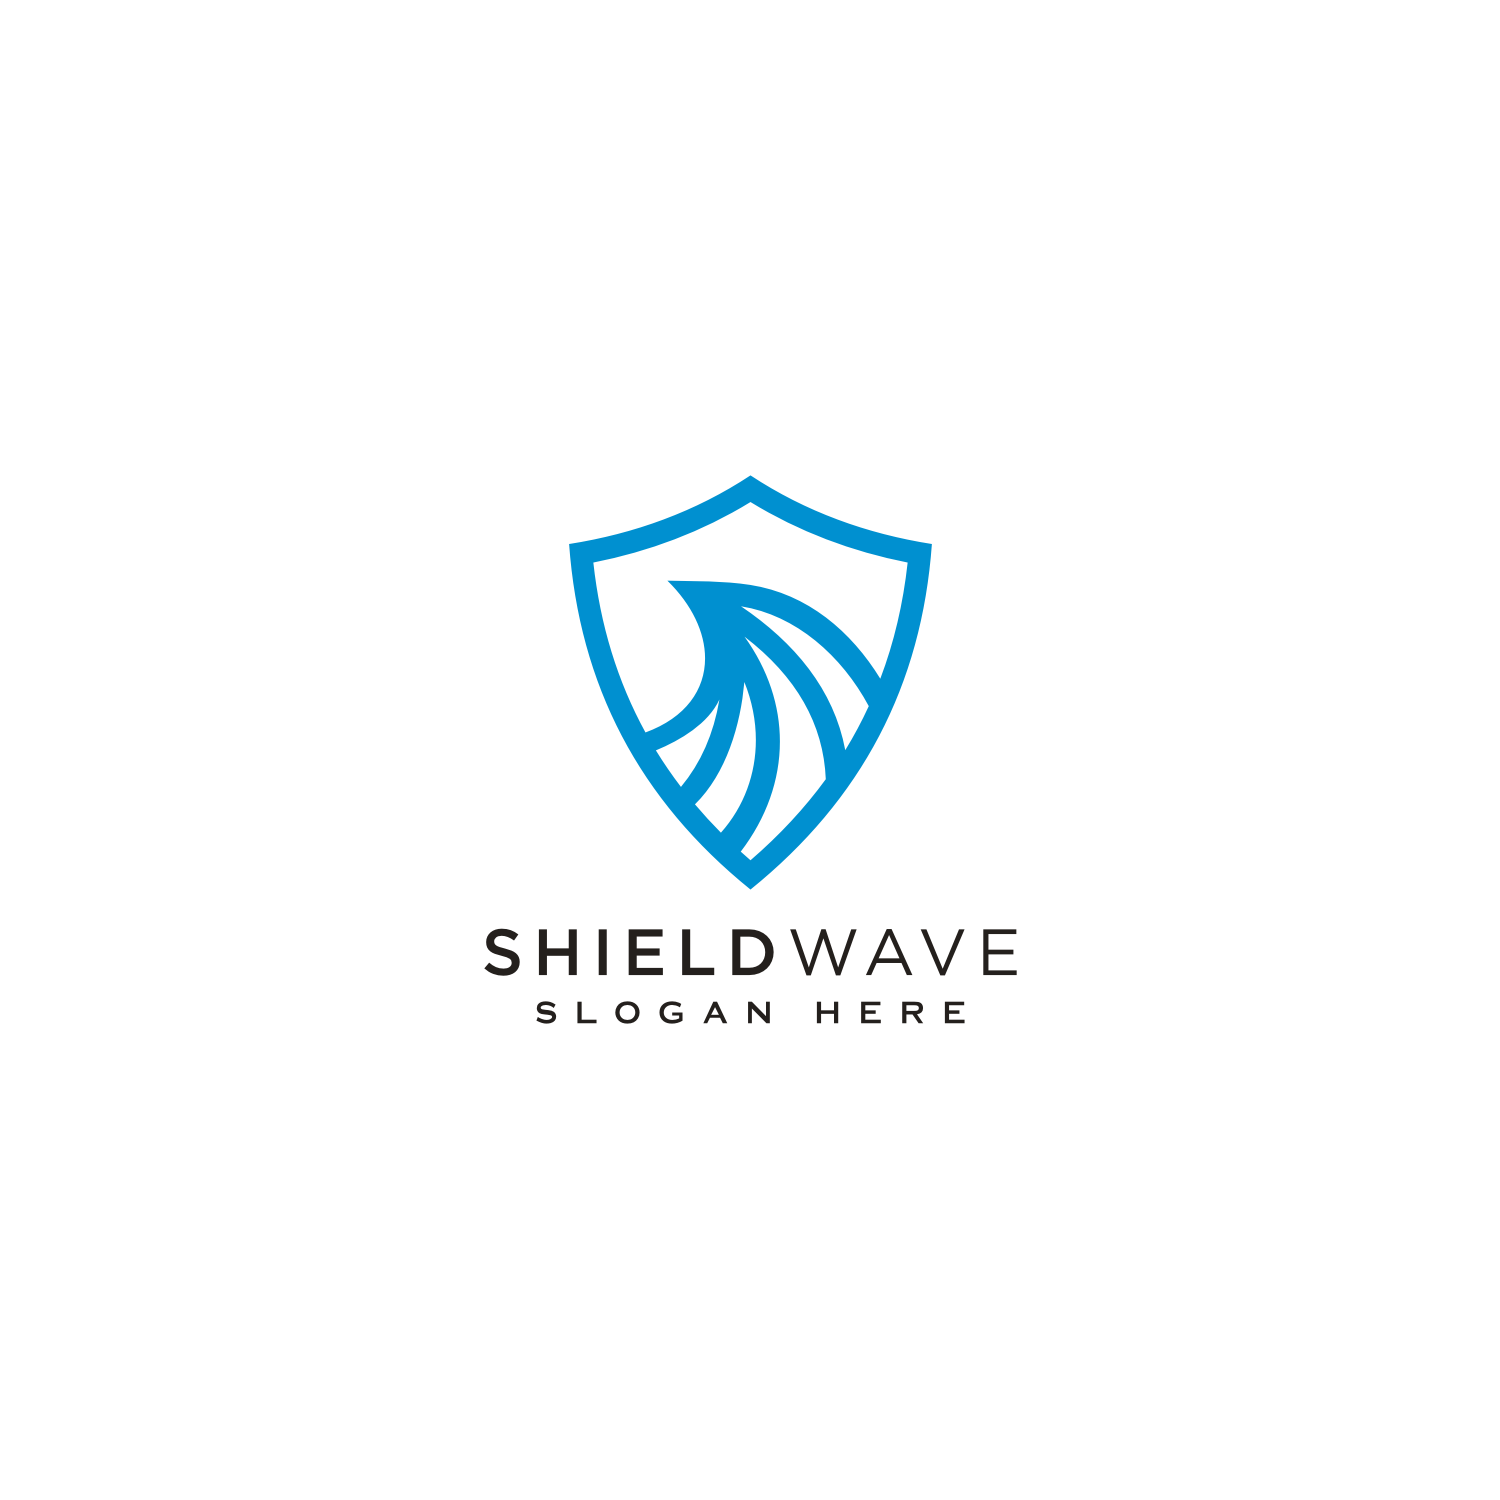 Shield Wave Logo Design Vector Line Style cover image.